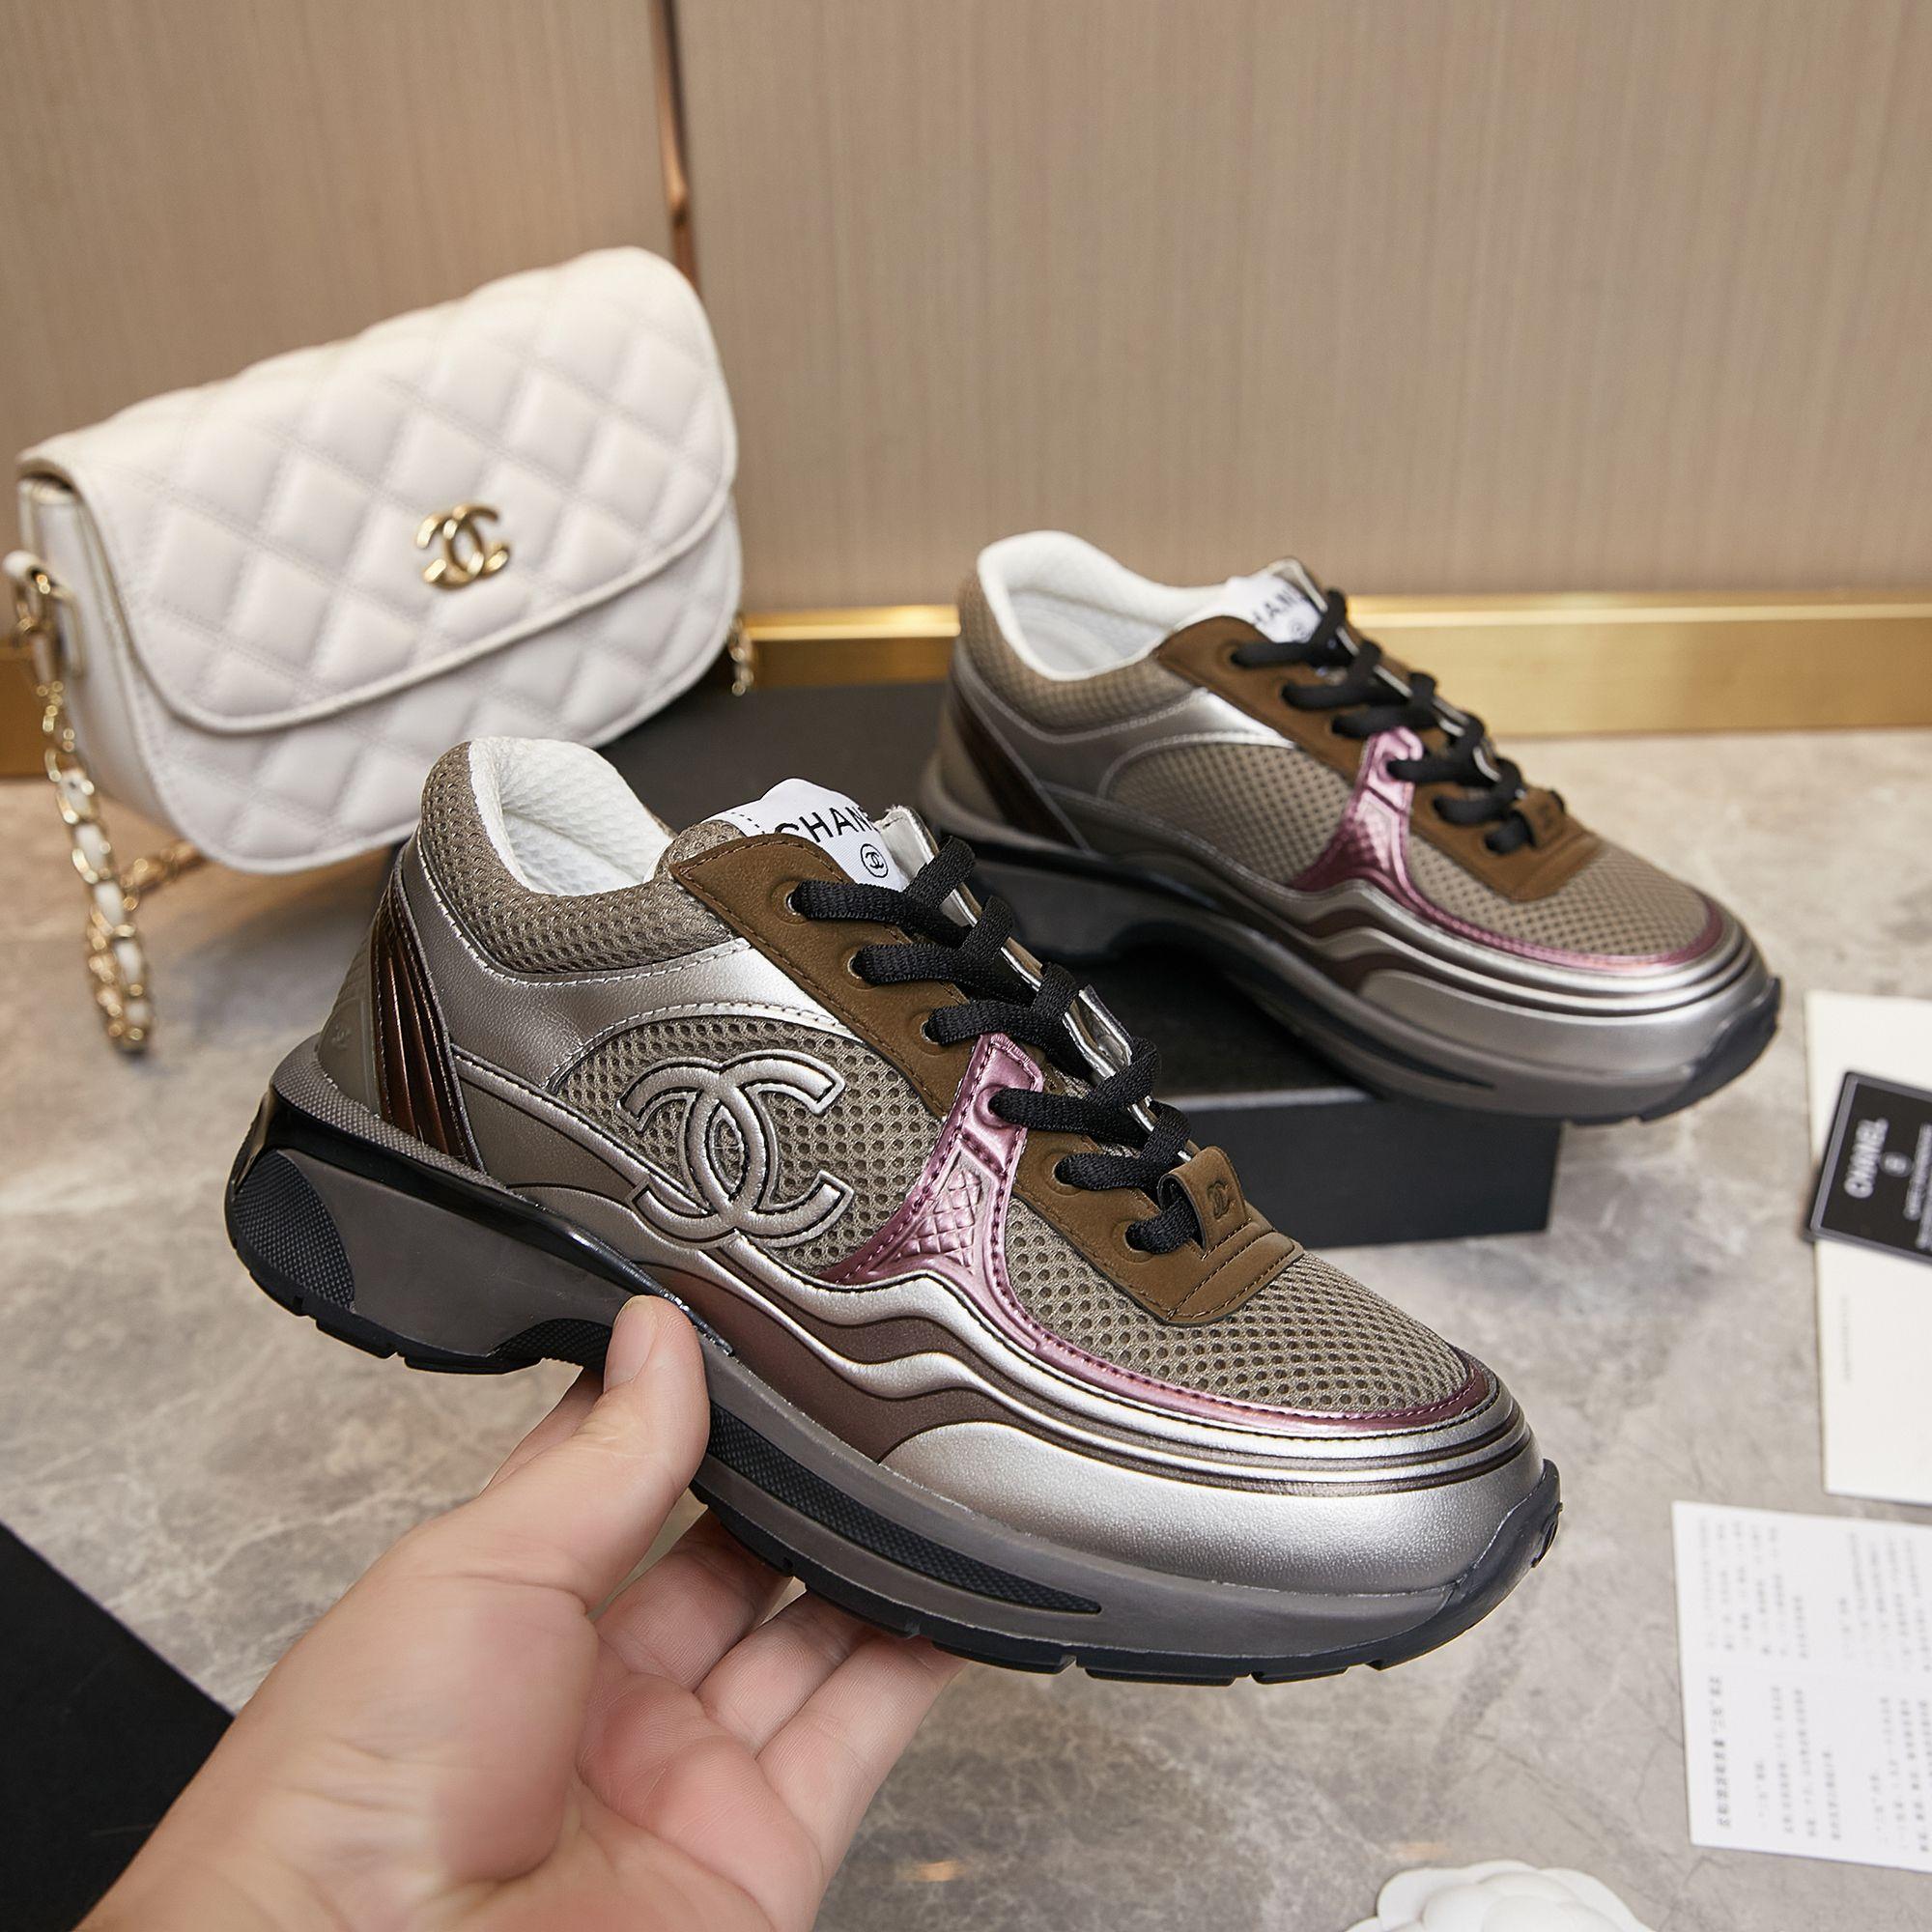 Chanel Fabric & Laminated Sneakers - everydesigner